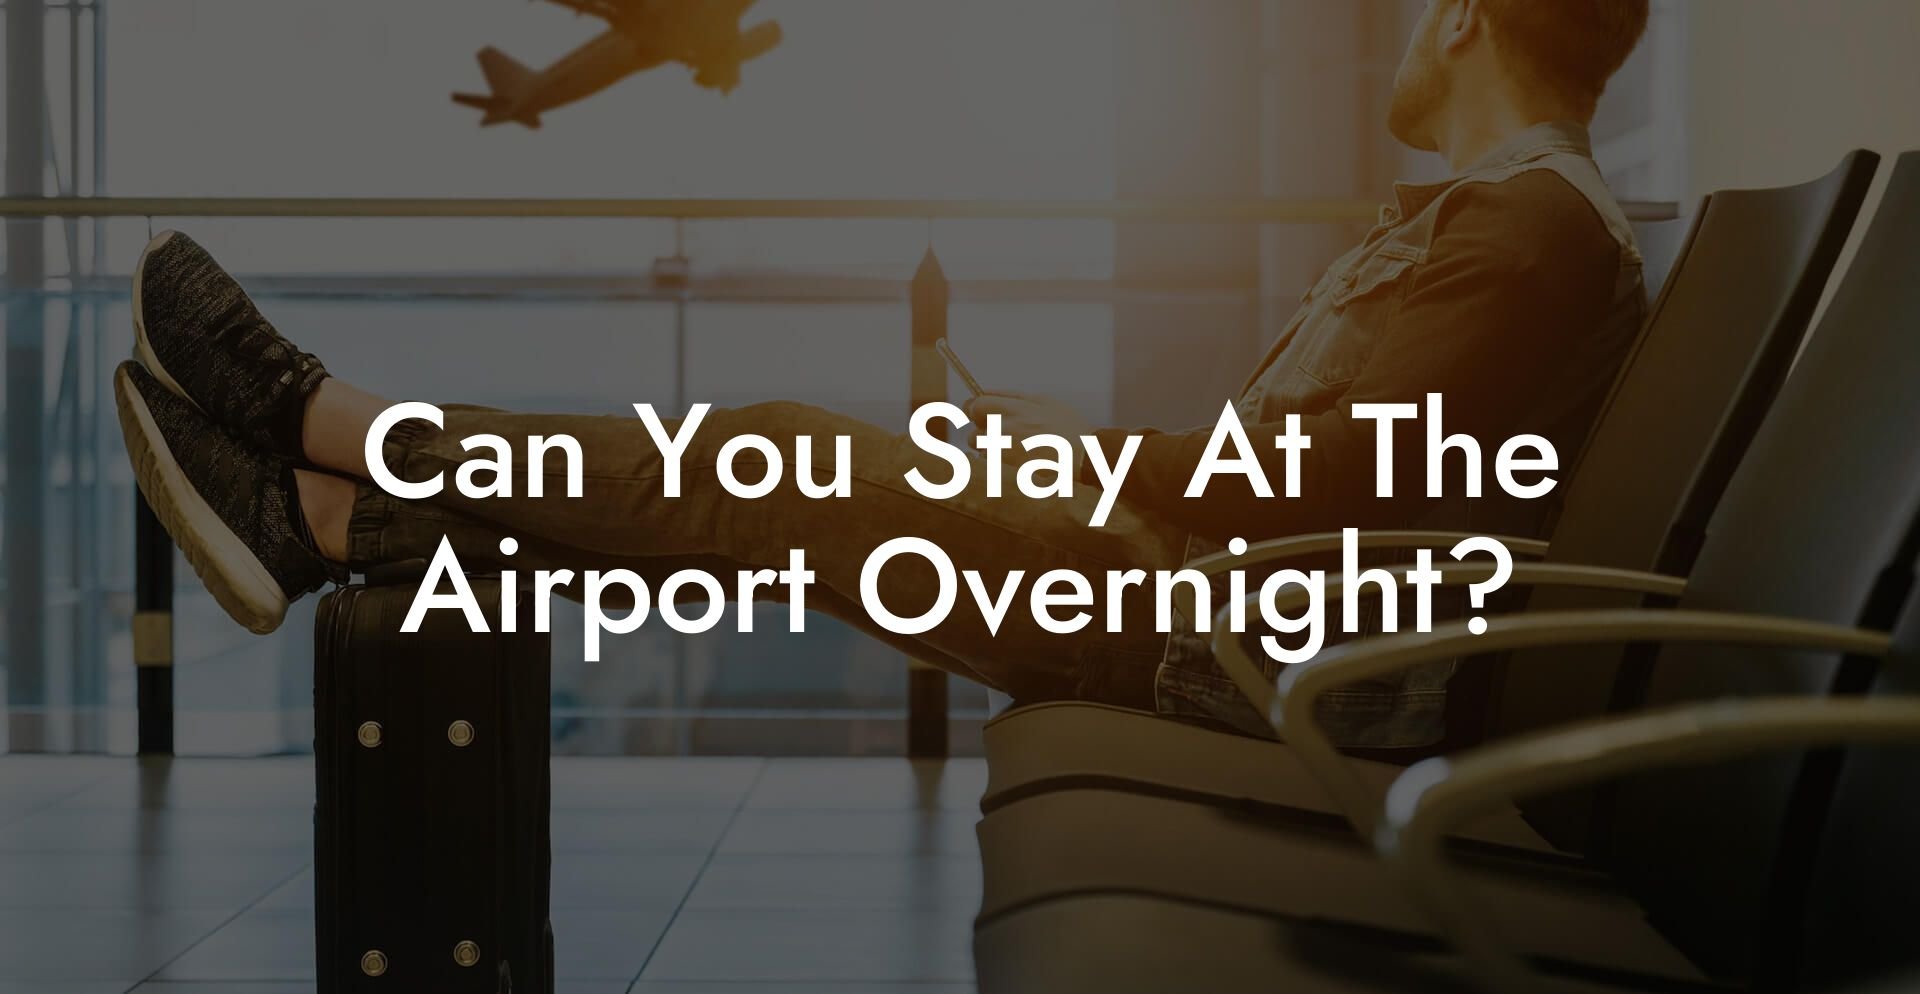 Can You Stay At The Airport Overnight?